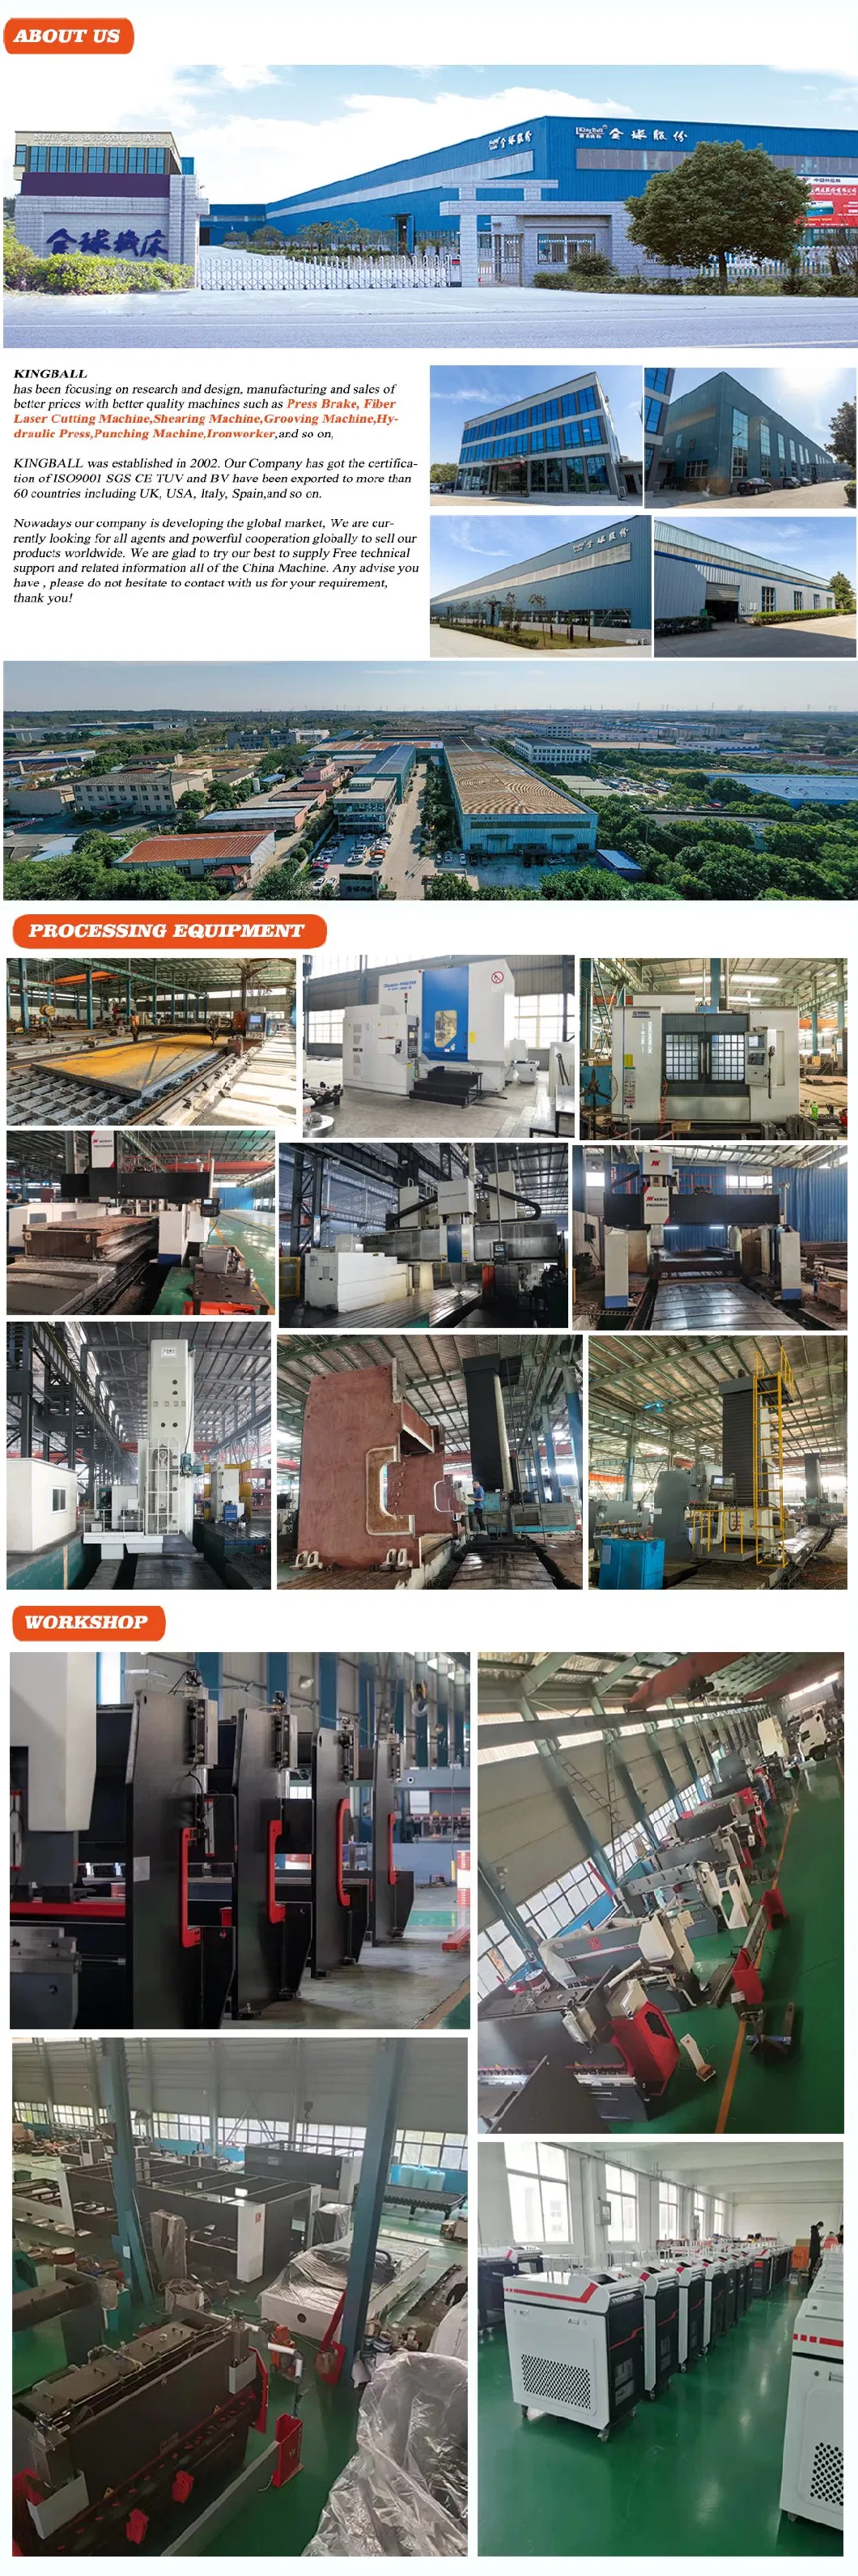 Small Press Brake Electro Hydraulic Servo CNC Press Brake Sheet Metal Expert Machine Features Accurate, Fast and Stable